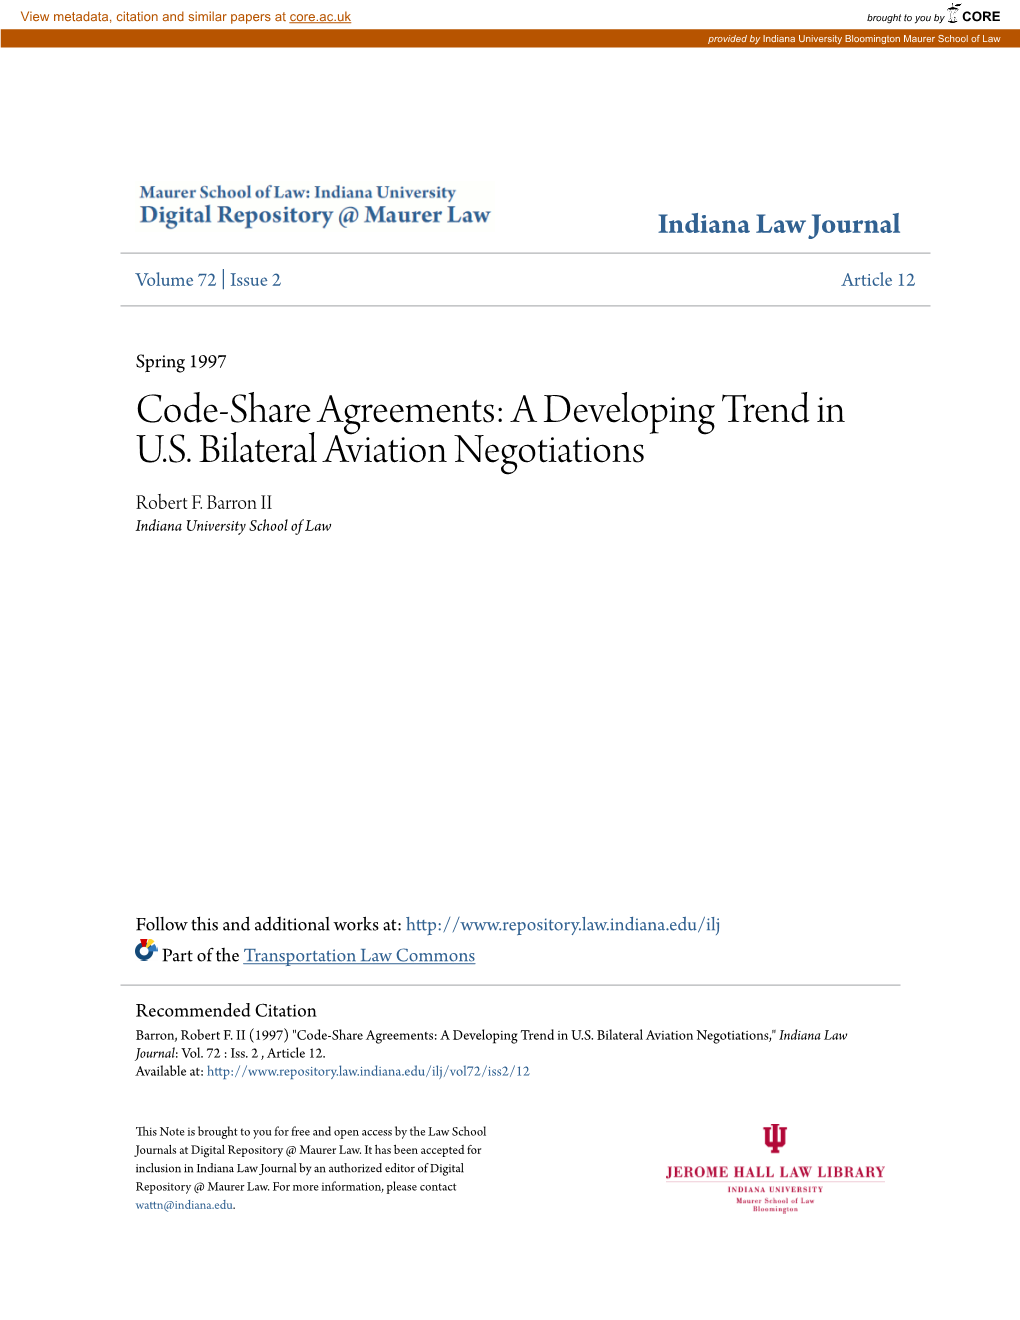 Code-Share Agreements: a Developing Trend in U.S